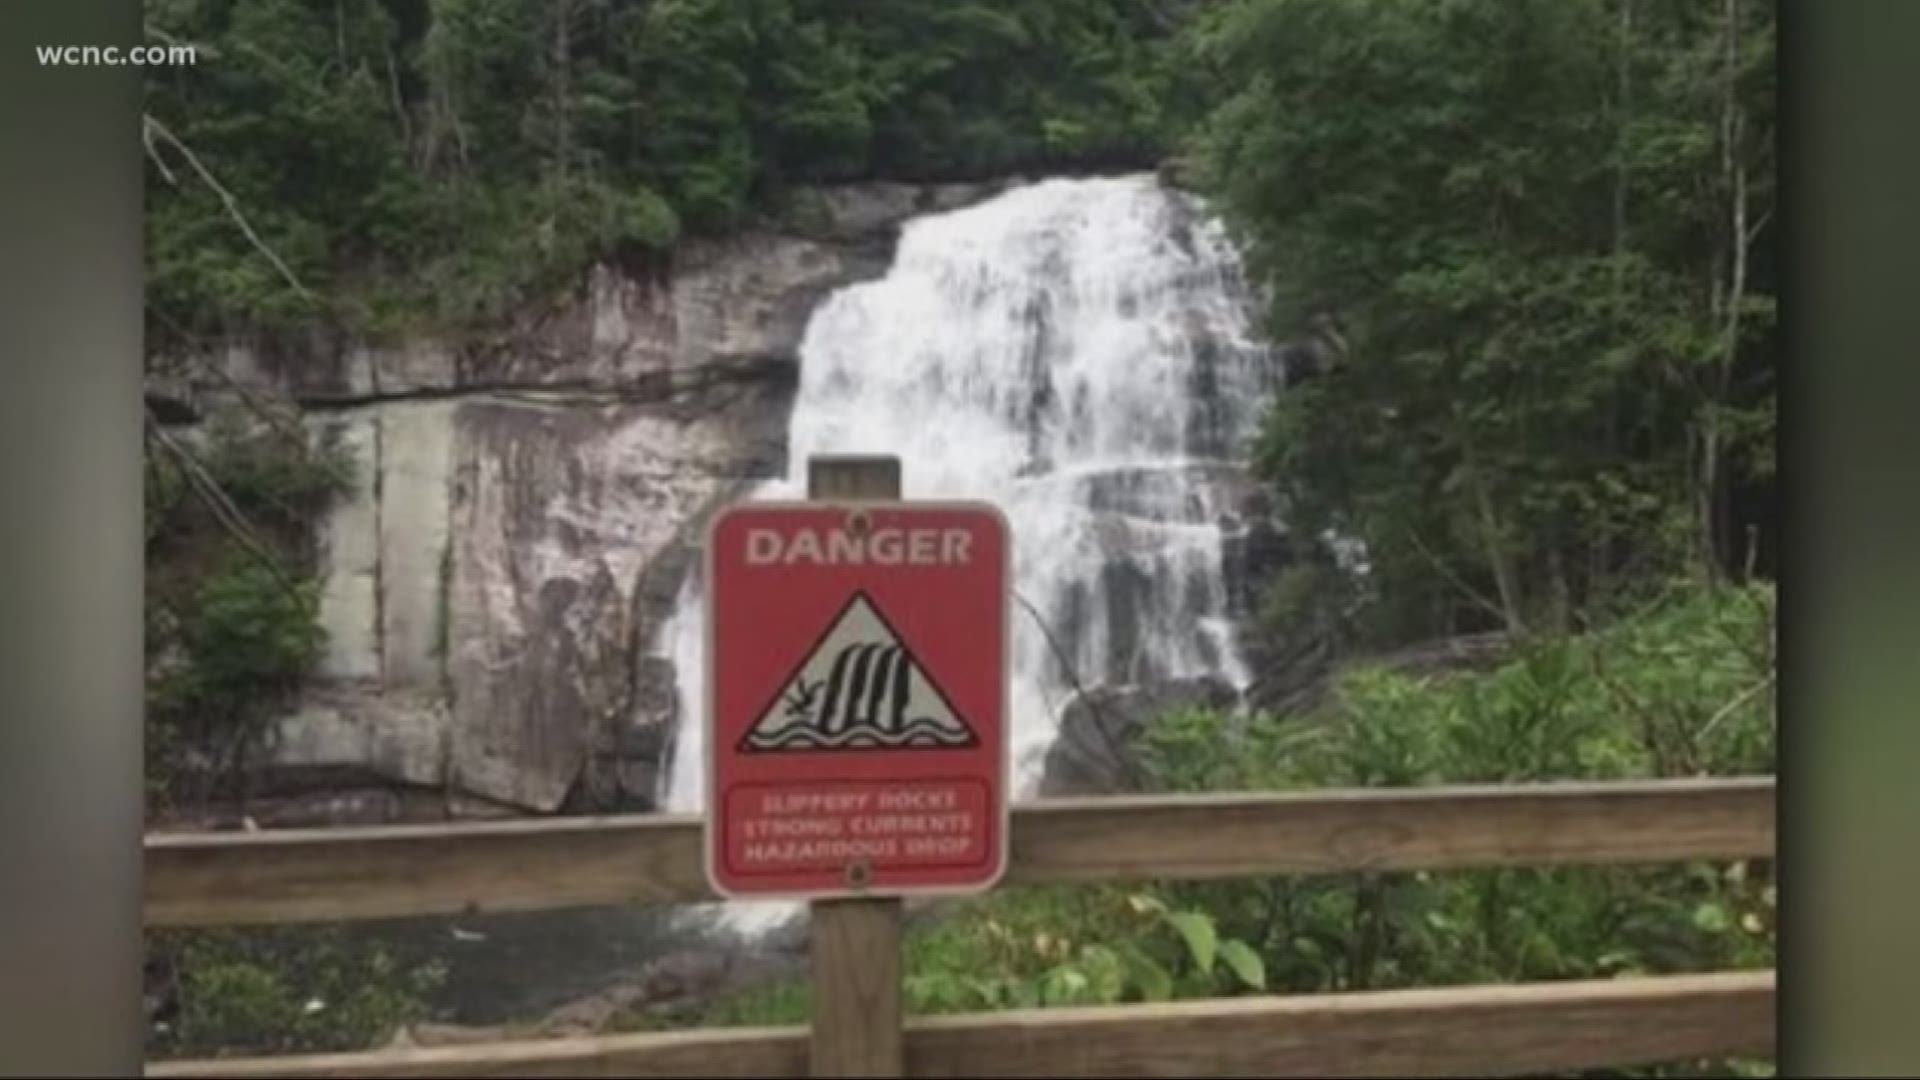 A South Carolina man died on Saturday after being swept over Rainbow Falls while trying to save his dog, according to officials.